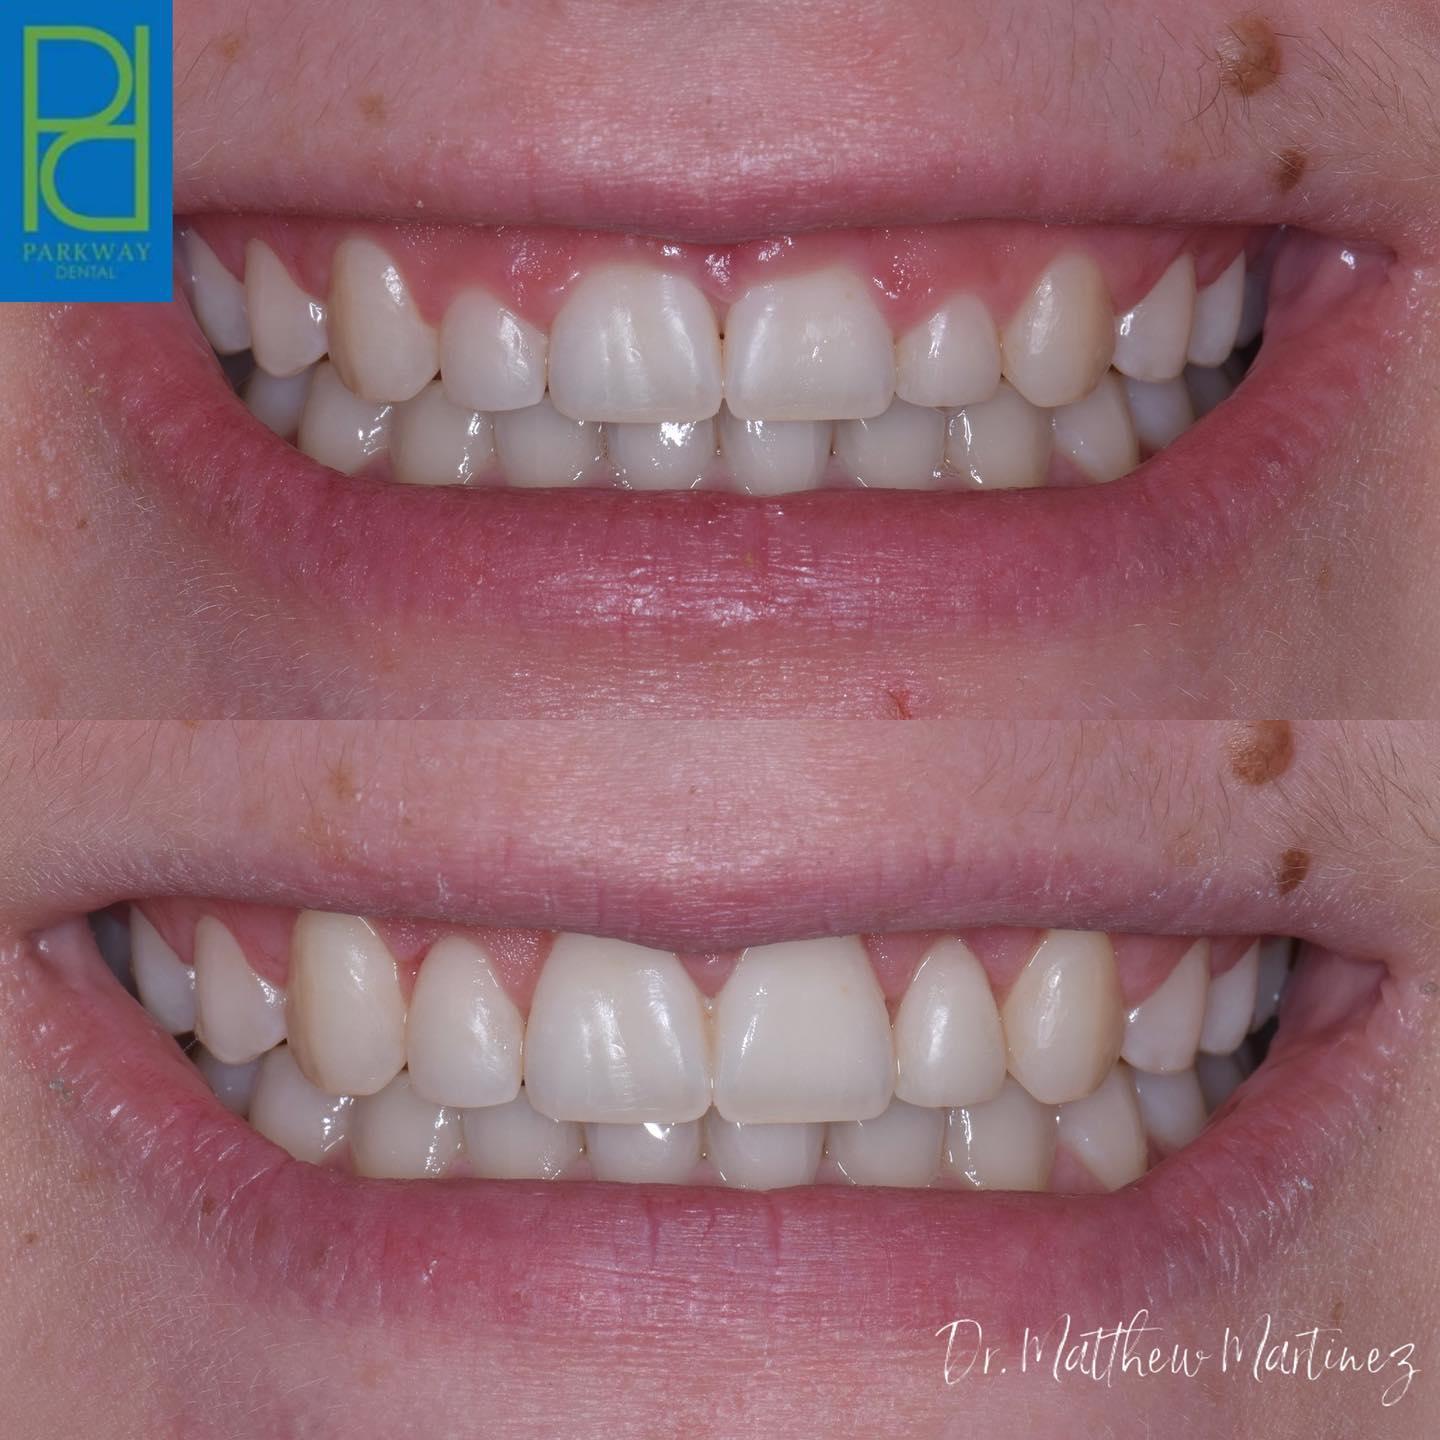 Before & After from Parkway Dental: Michael D Haight, DDS | Albuquerque, NM Parkway Dental: Michael D Haight, DDS Albuquerque (505)298-7479